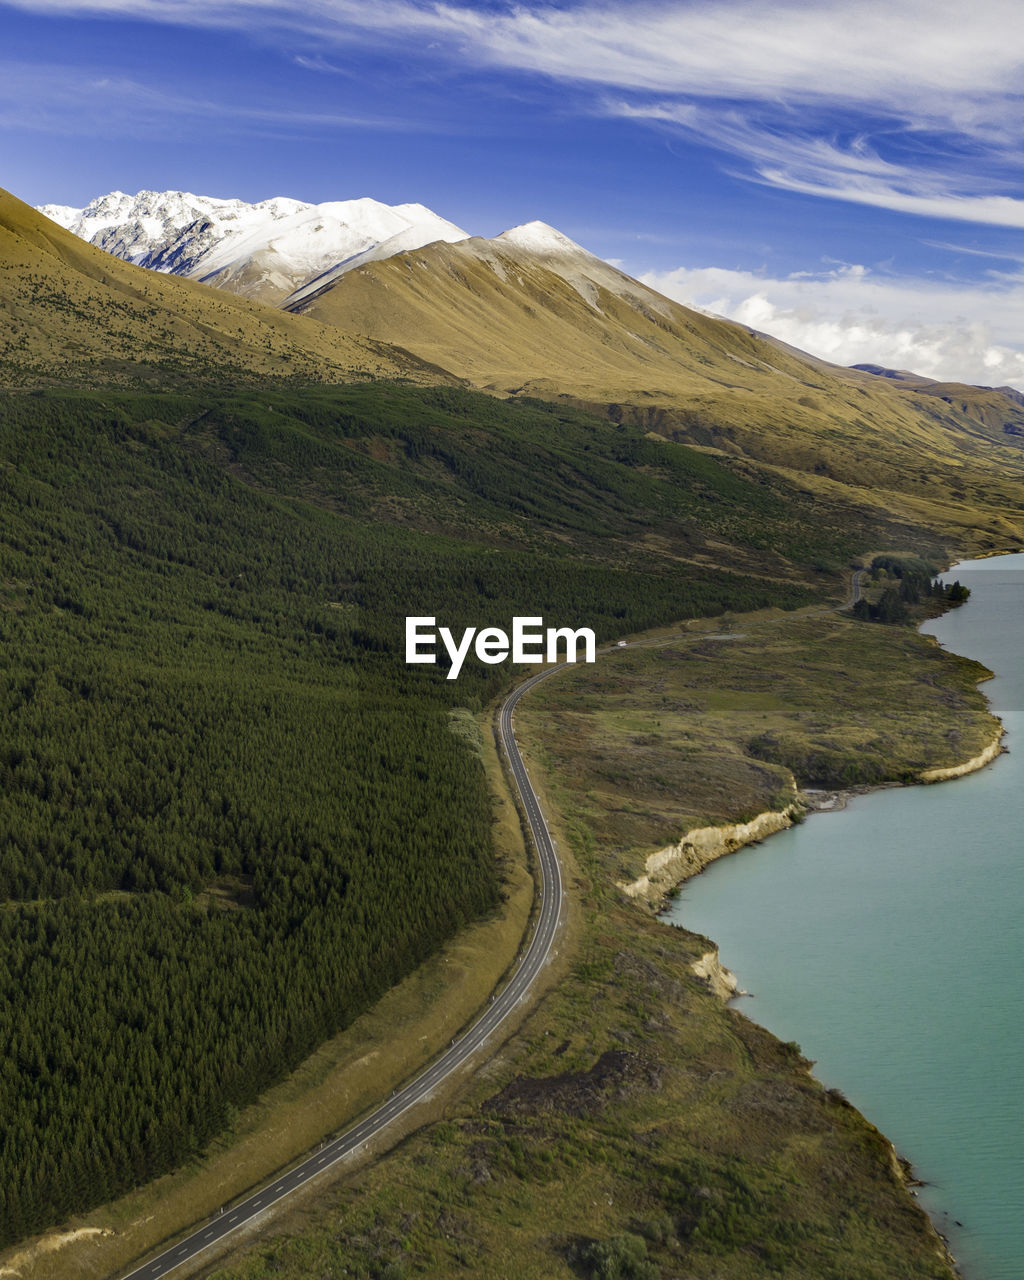 Road running through scenic landscape in south island, new zealand